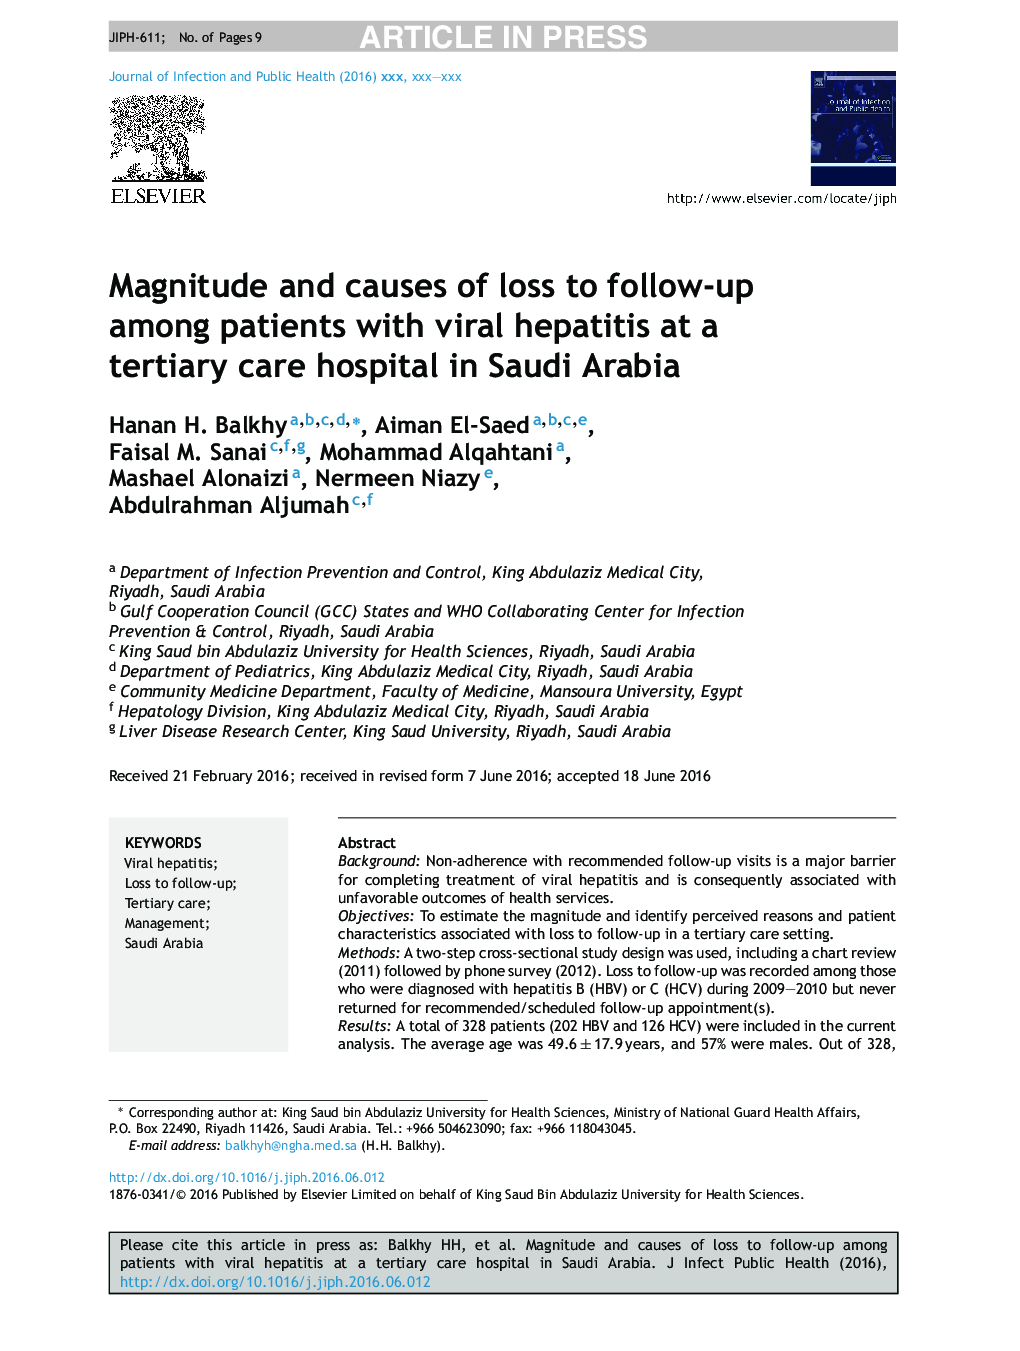 Magnitude and causes of loss to follow-up among patients with viral hepatitis at a tertiary care hospital in Saudi Arabia